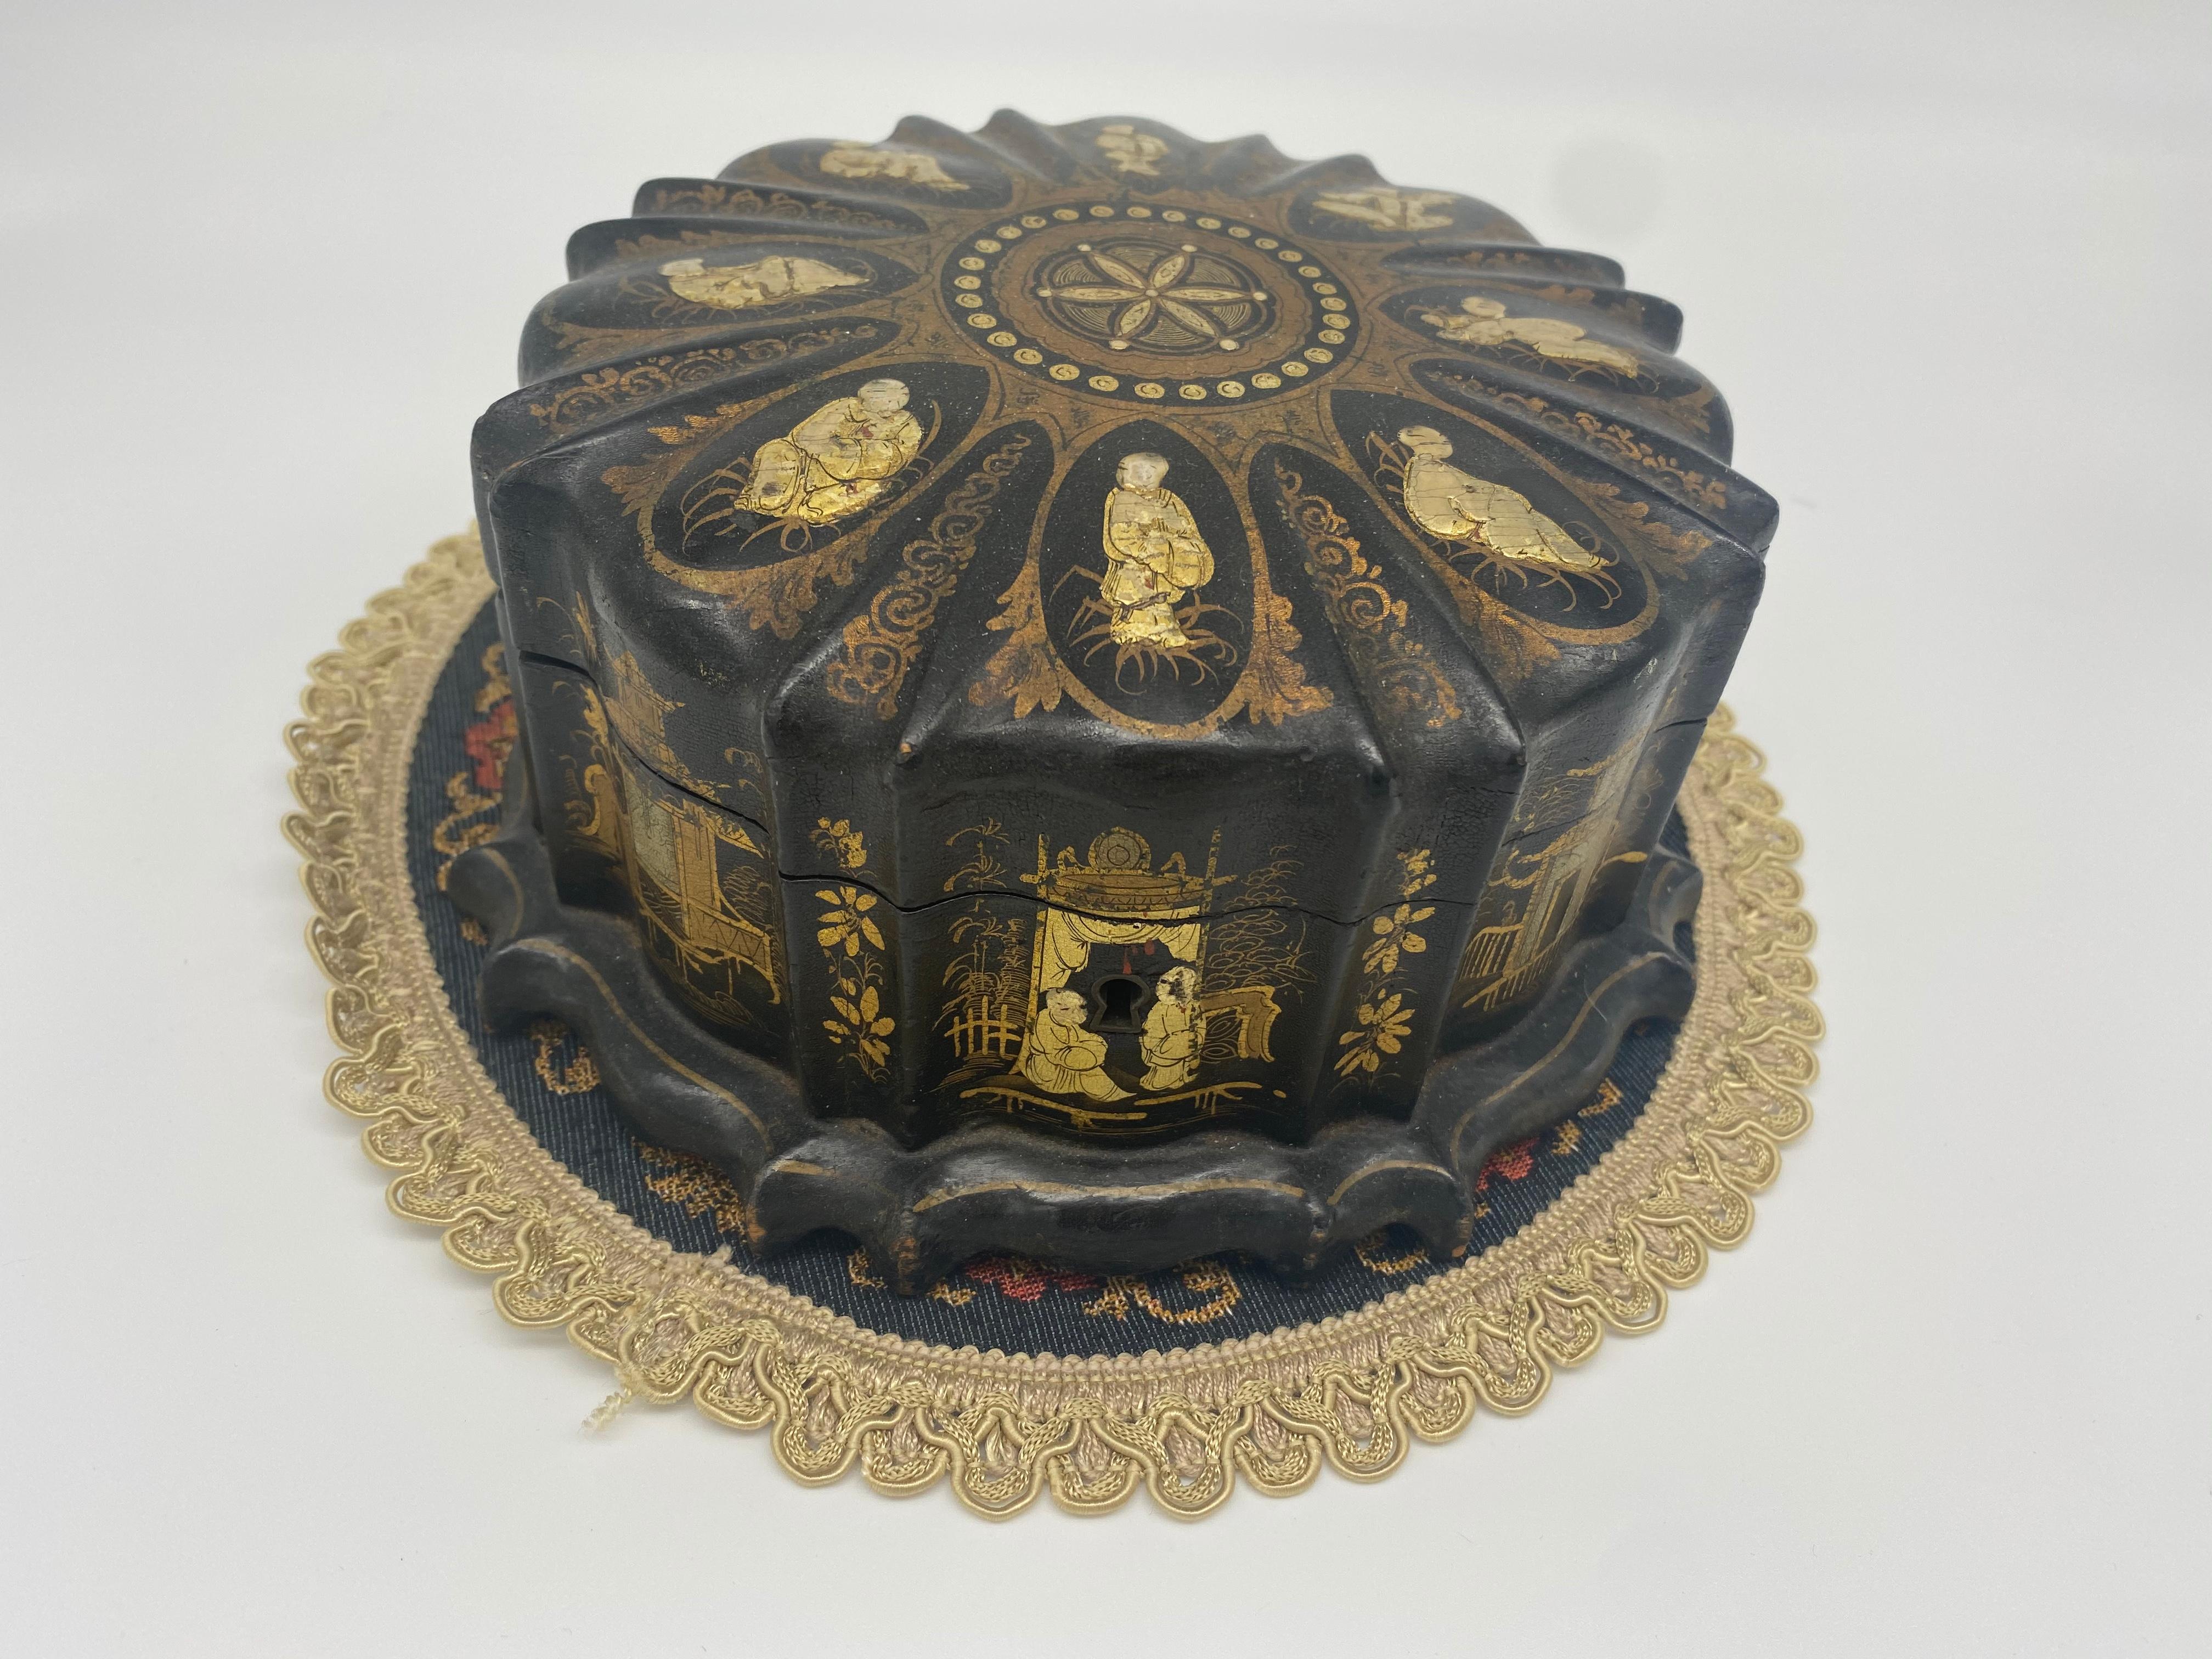 19th century Qing Dynasty Chinese lacquer jewelry box detailed with various genre scenes in gold detail. Pink silk lining, can be locked, does not include key. Very unique shape. Silk lining is deteriorated.